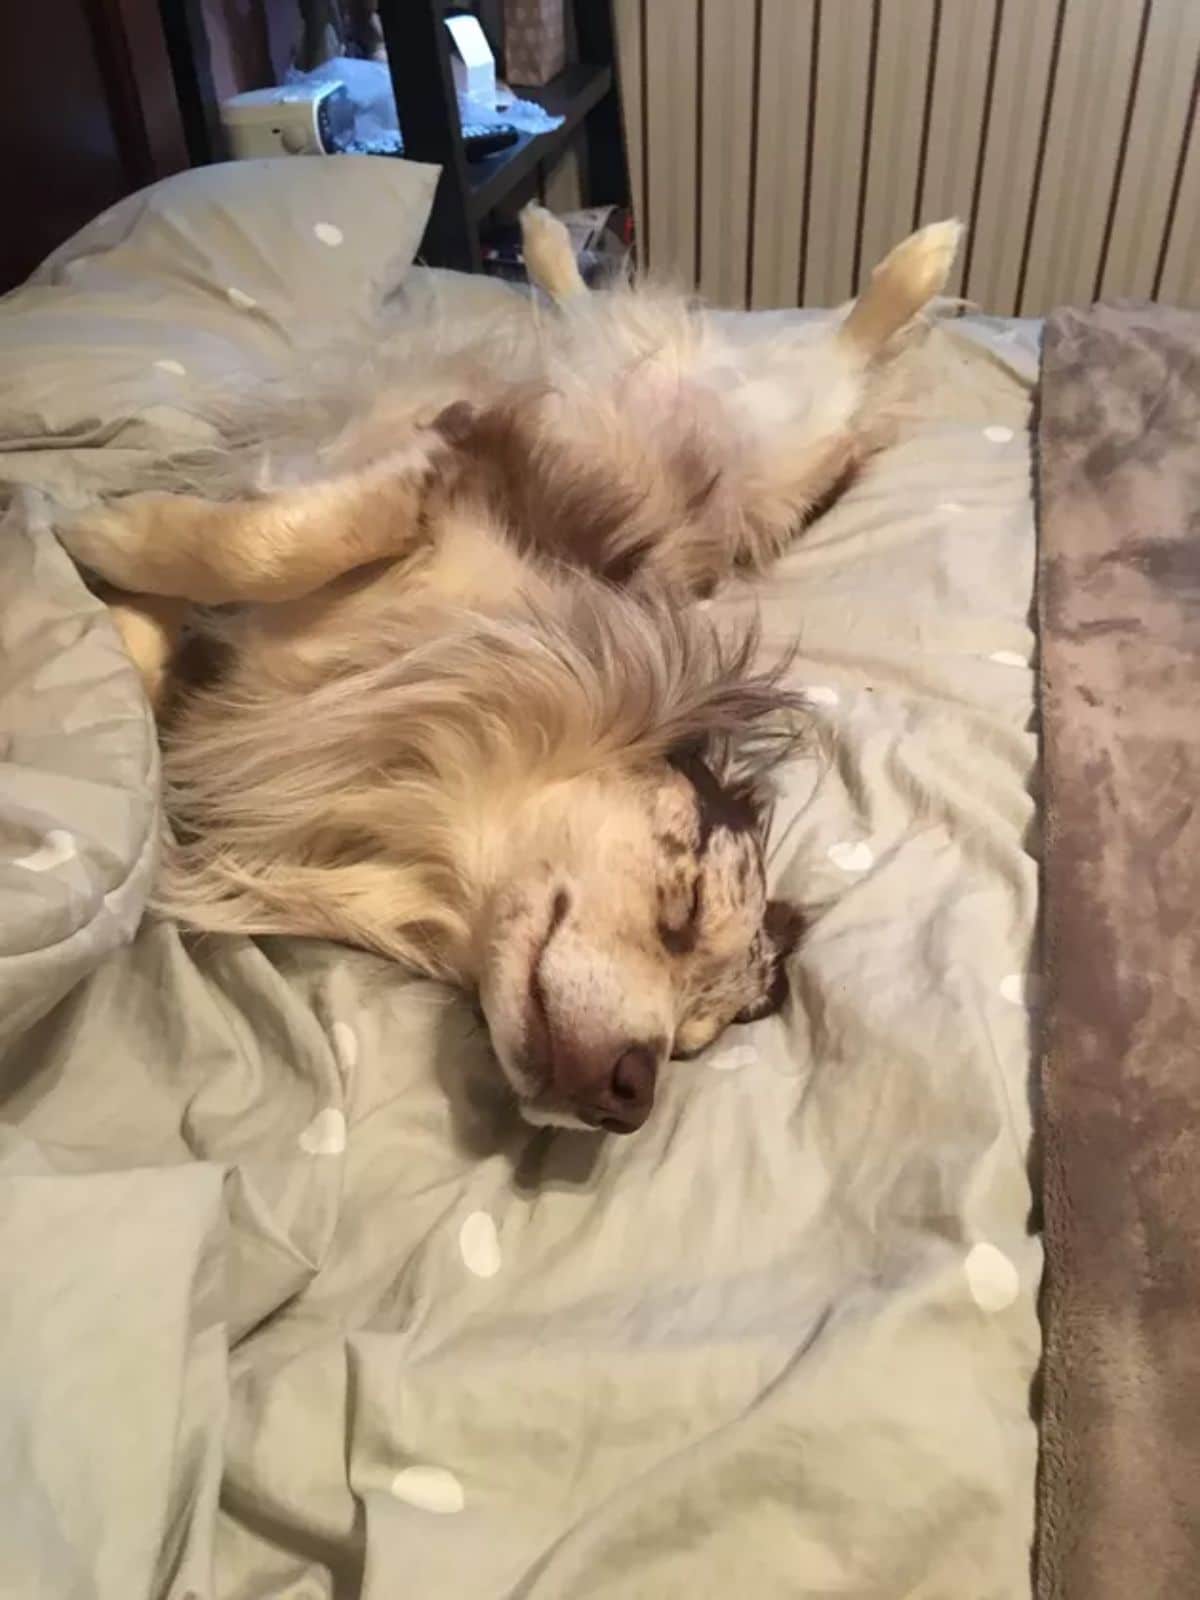 fluffy brown dog sleeping belly up across a brown bed